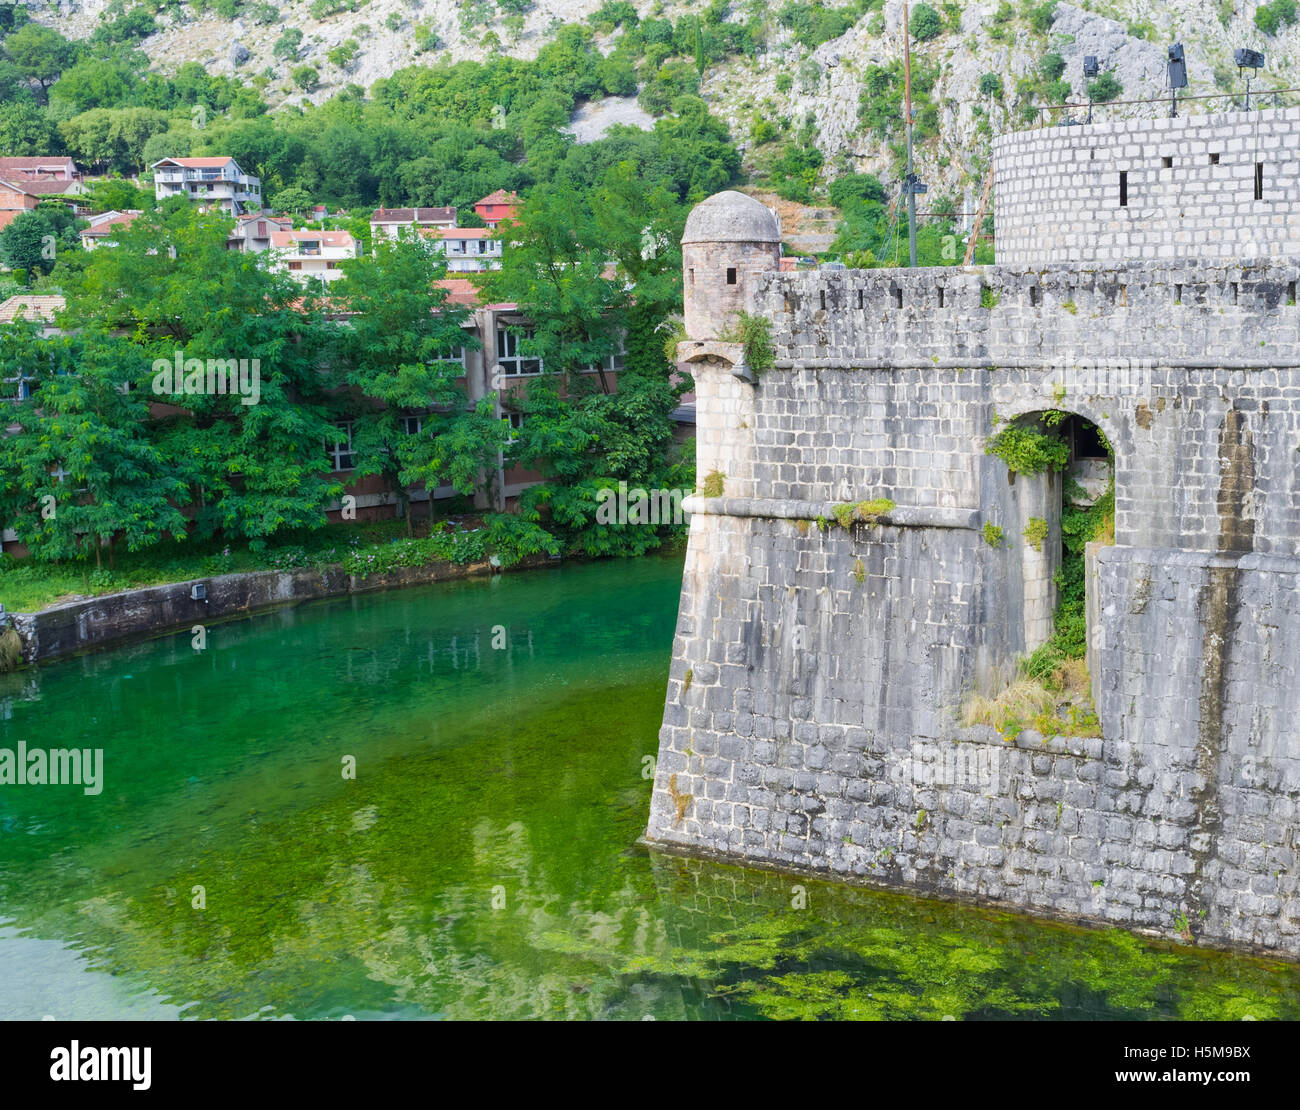 The huge ramparts of the old Venetian citadel  surrounded by moat, Kotor, Montenegro. Stock Photo